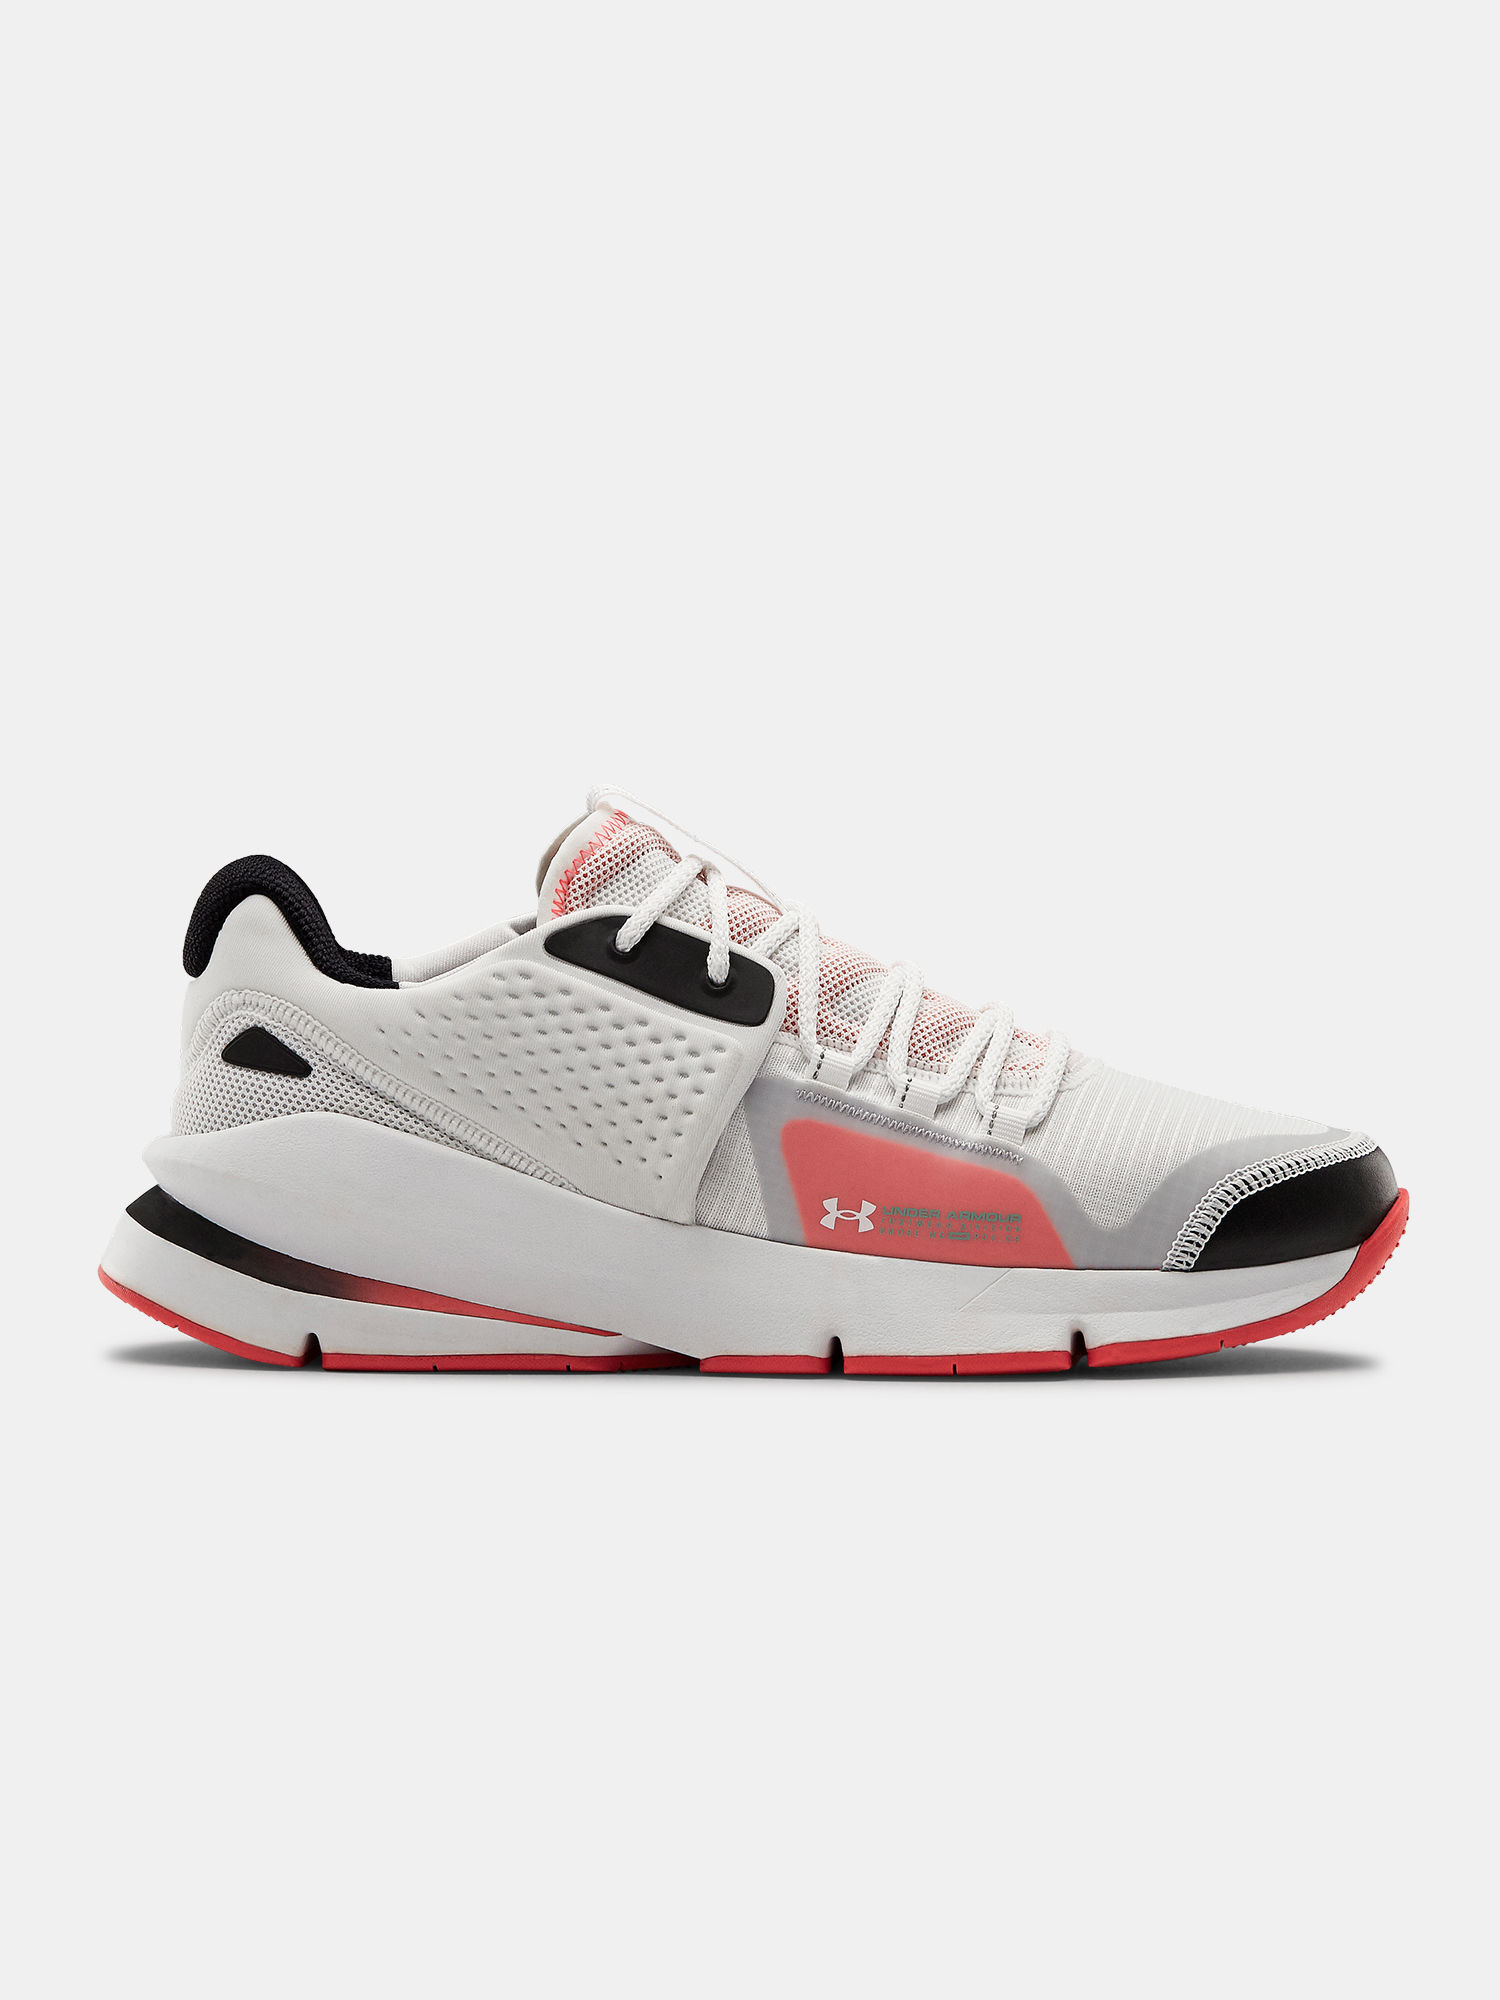 Boty Under Armour Forge RC (1)